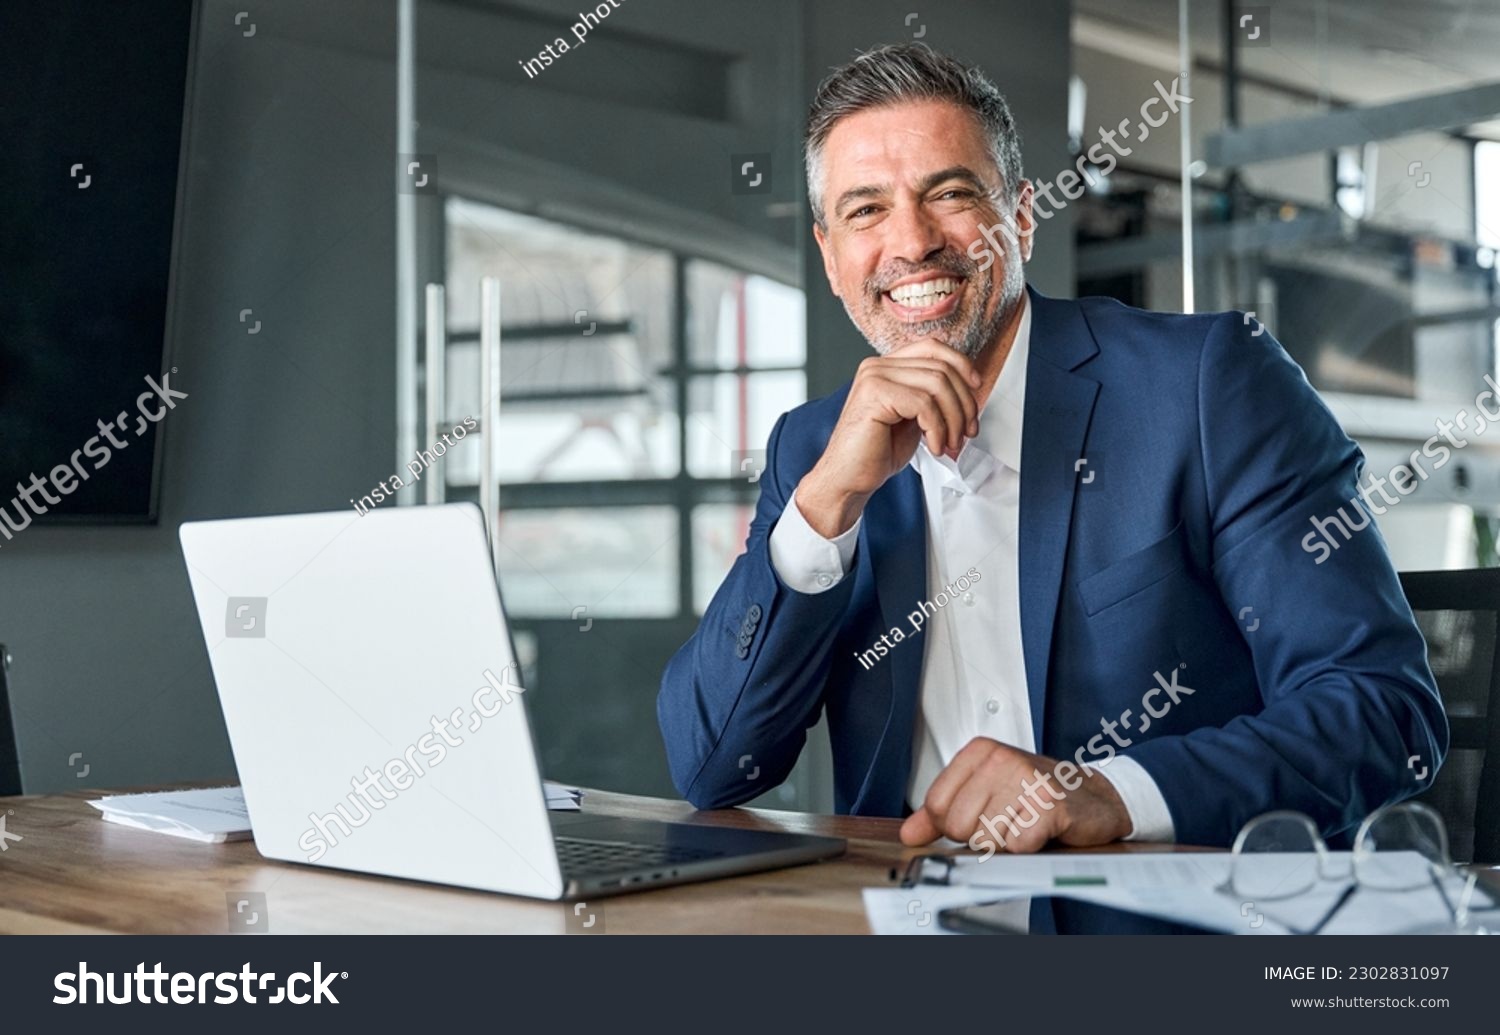 Happy smiling middle aged professional business man company executive ceo manager wearing blue suit sitting at desk in office working on laptop computer laughing at workplace. Portrait. #2302831097